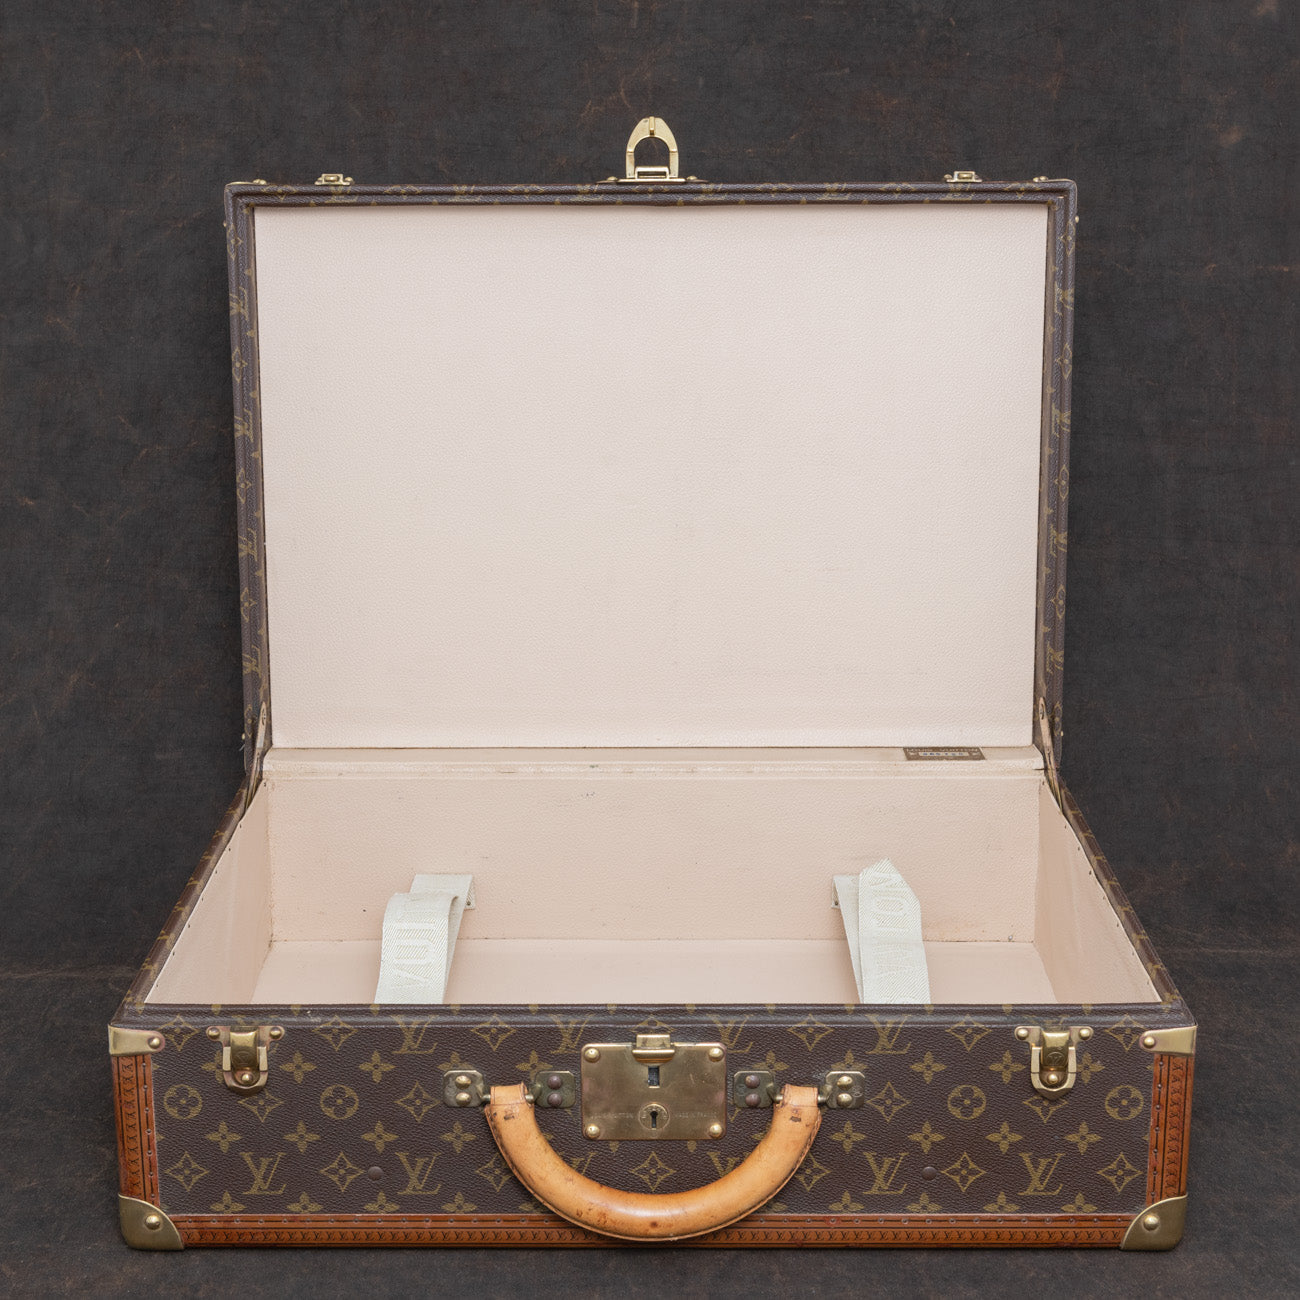 lv luggage cover